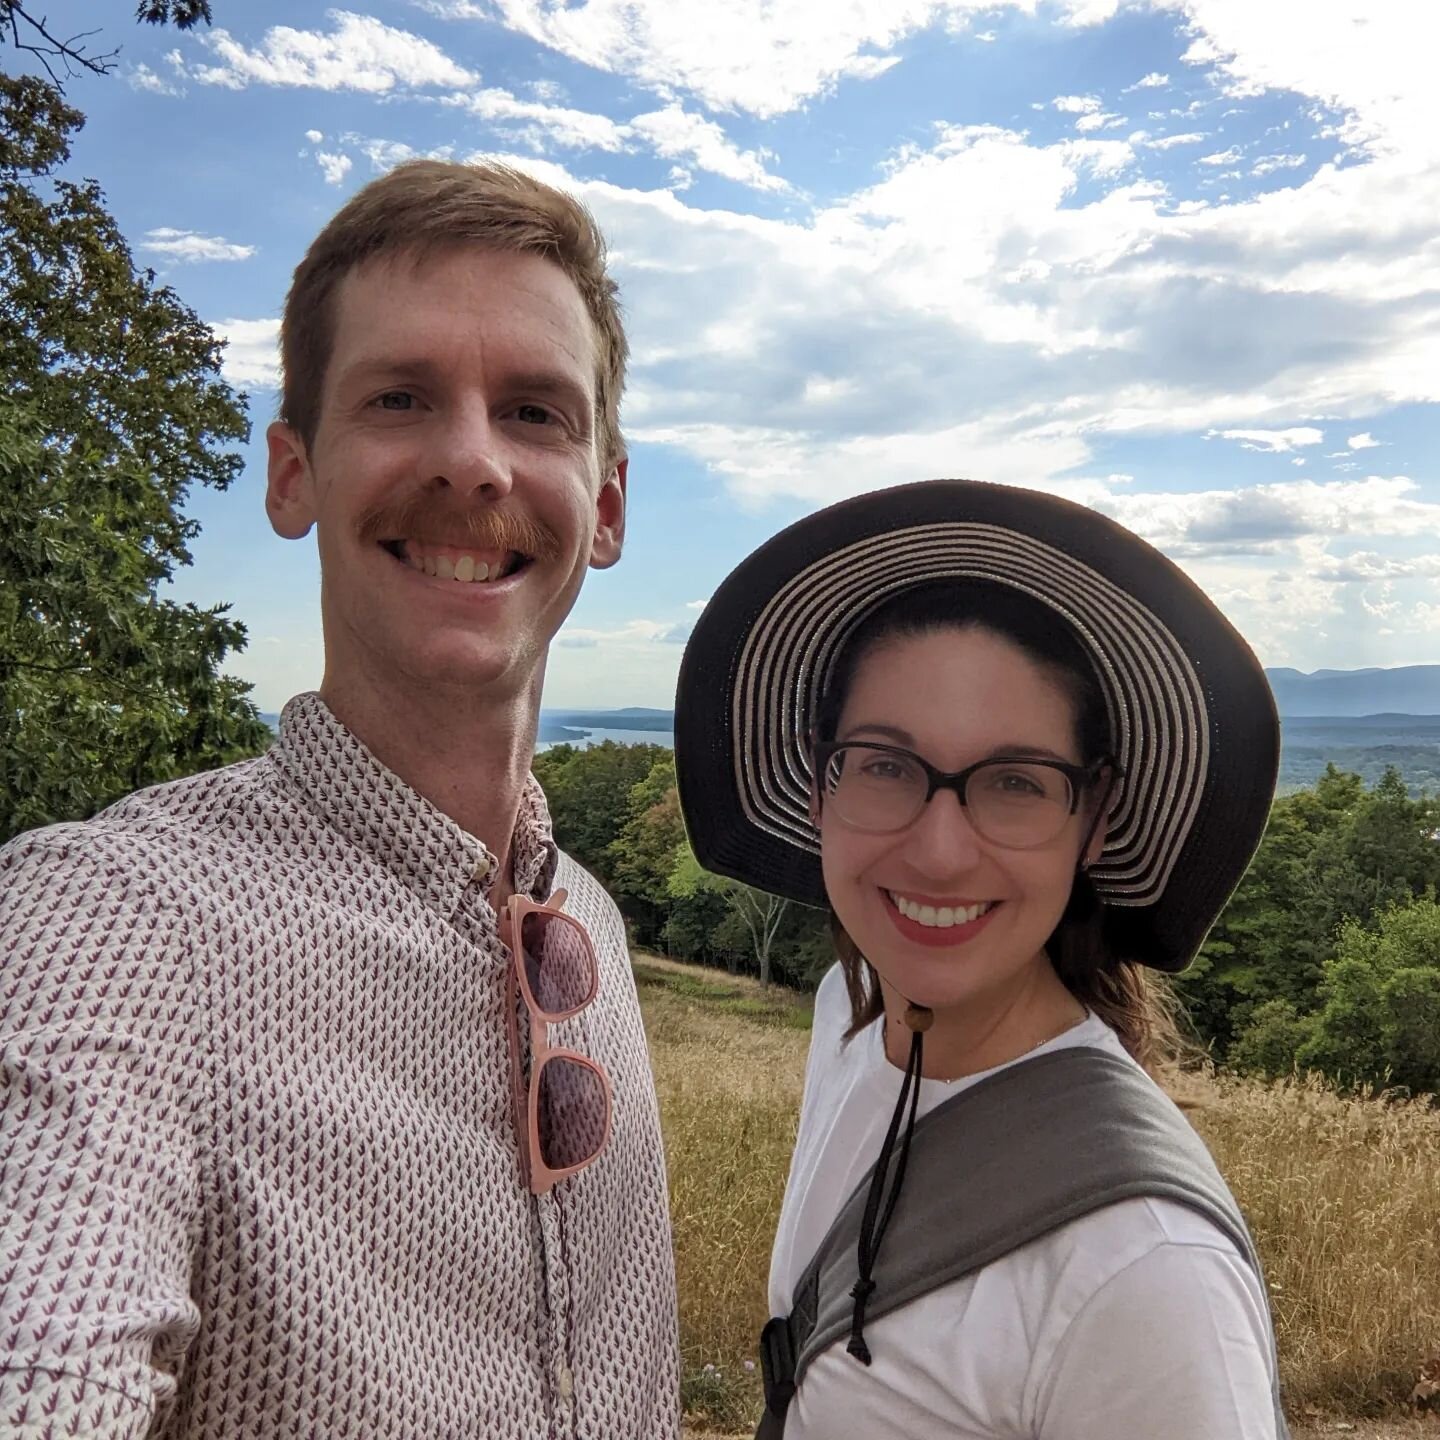 We've been in the Catskills this past week and have thoroughly enjoyed the food, brews, hikes, rides and views during our relaxing workcation from the mountains 👨&zwj;🌾👩&zwj;🌾